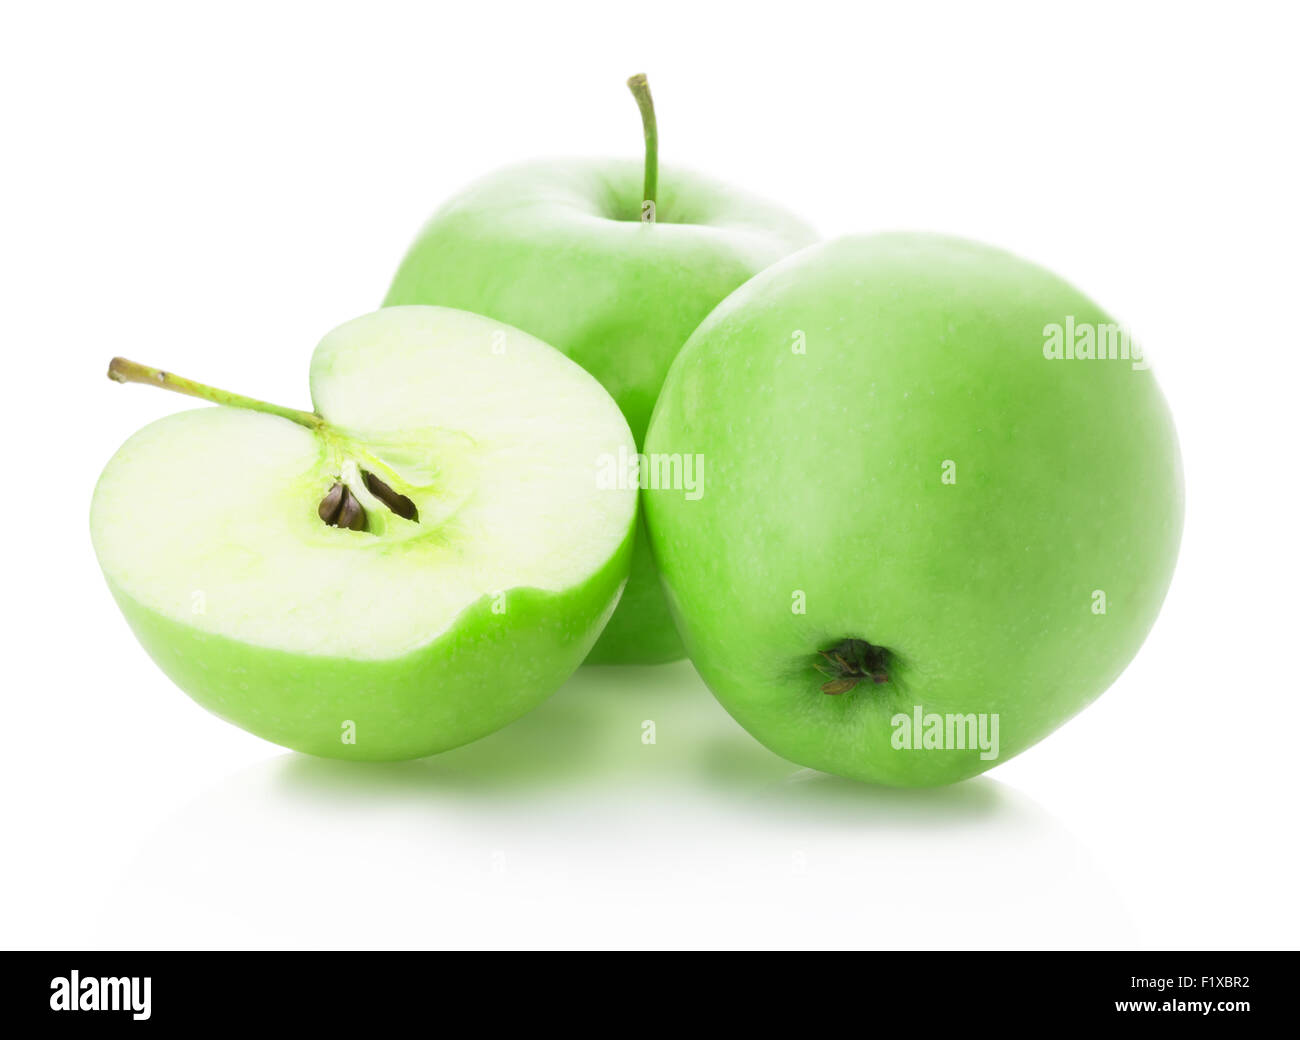 green apples and apple slices on white background Stock Photo